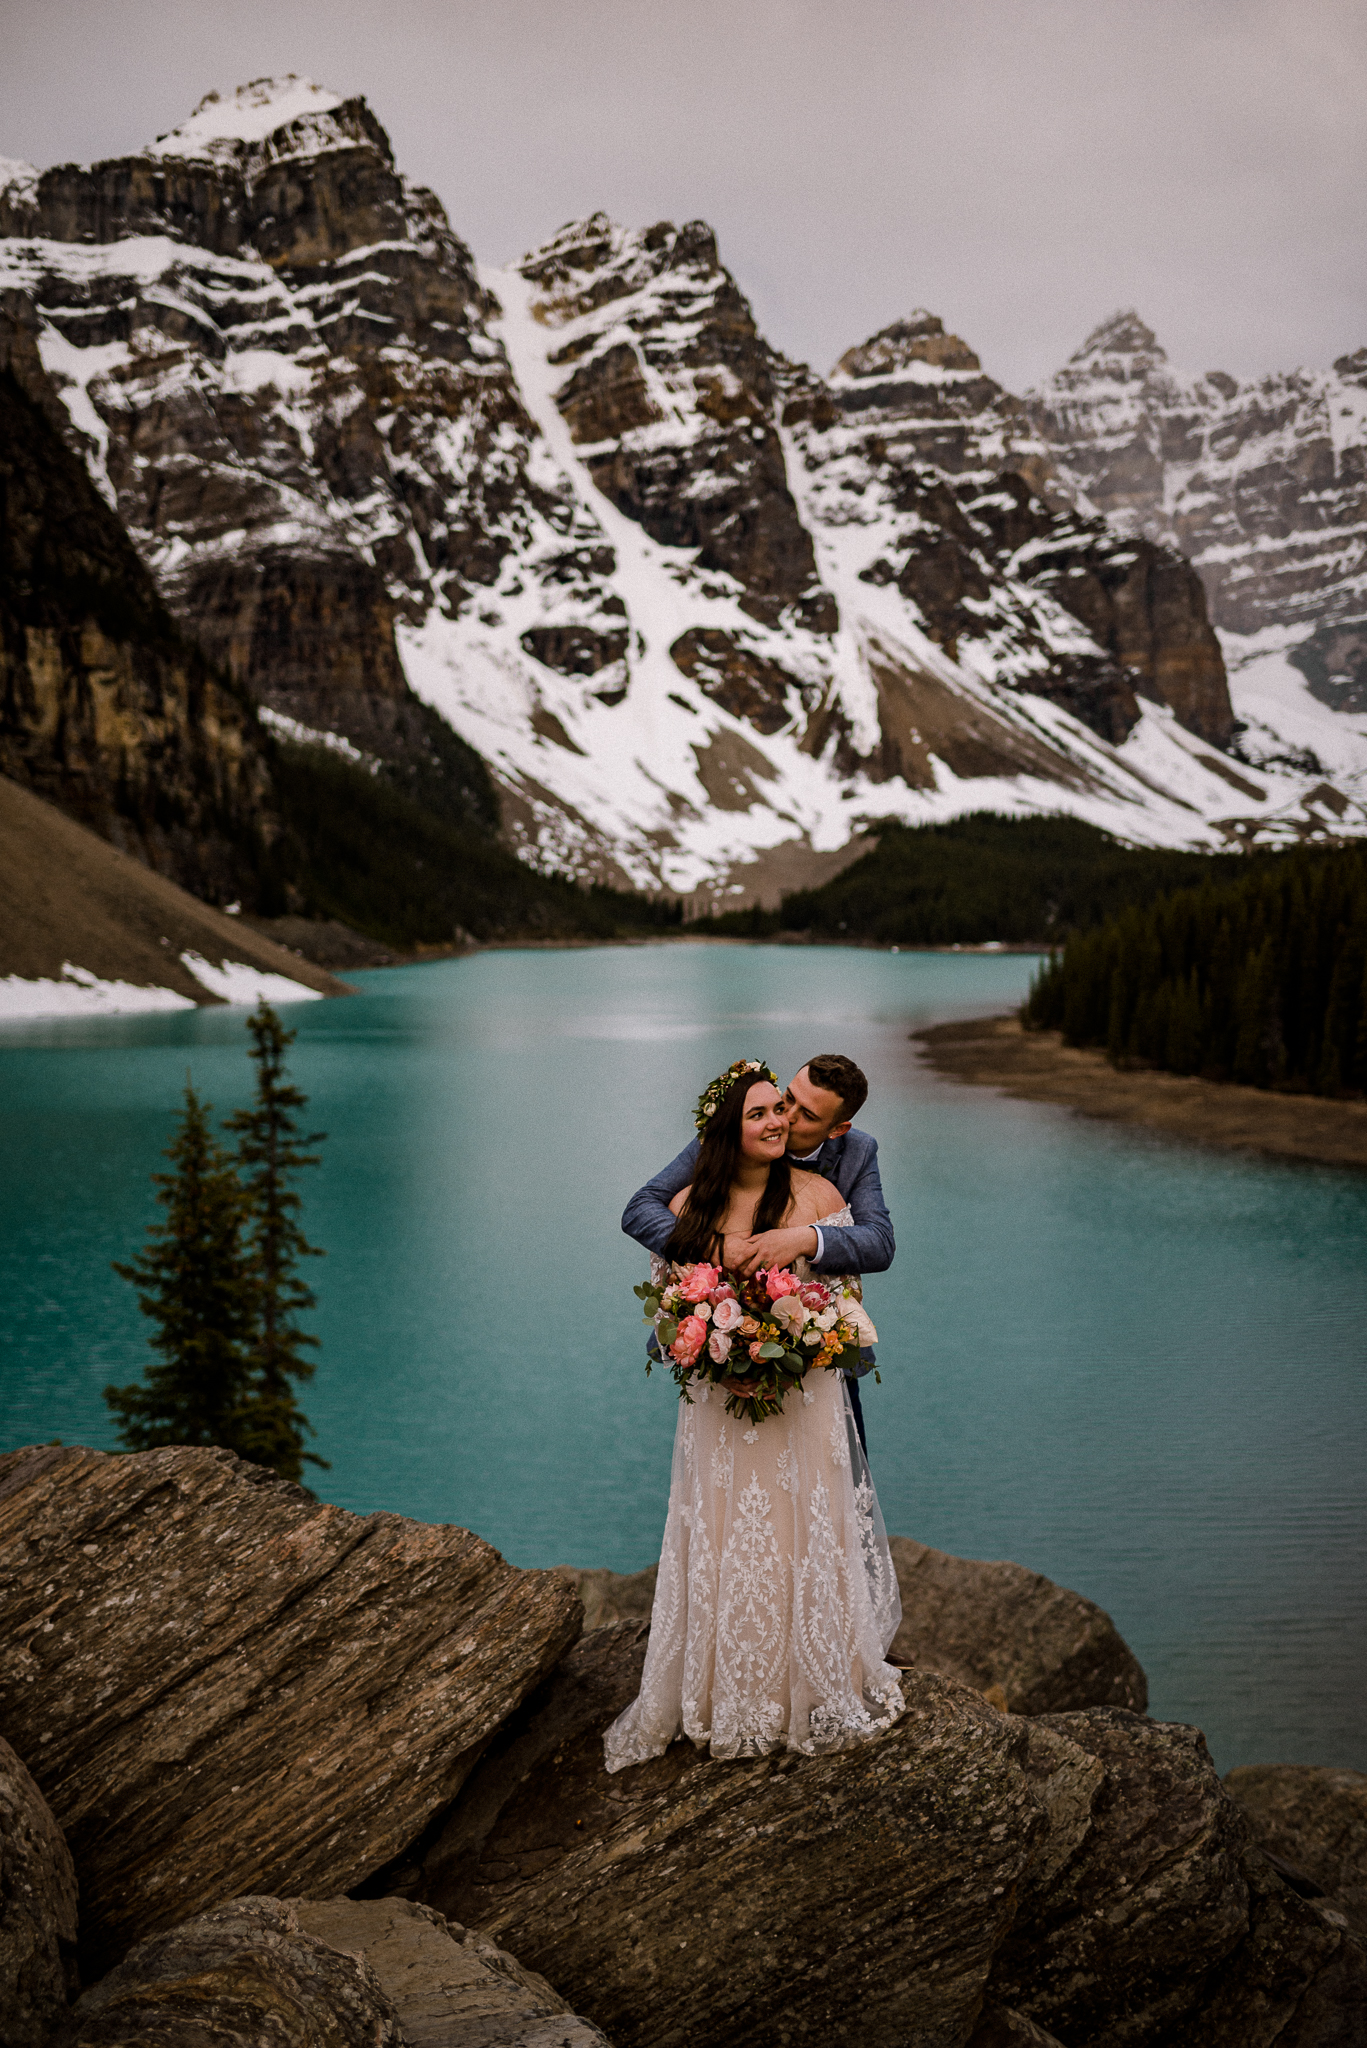 Groom hugging bride from behind while she holds bouquet and laughs in front of Moraine Lake, Alberta